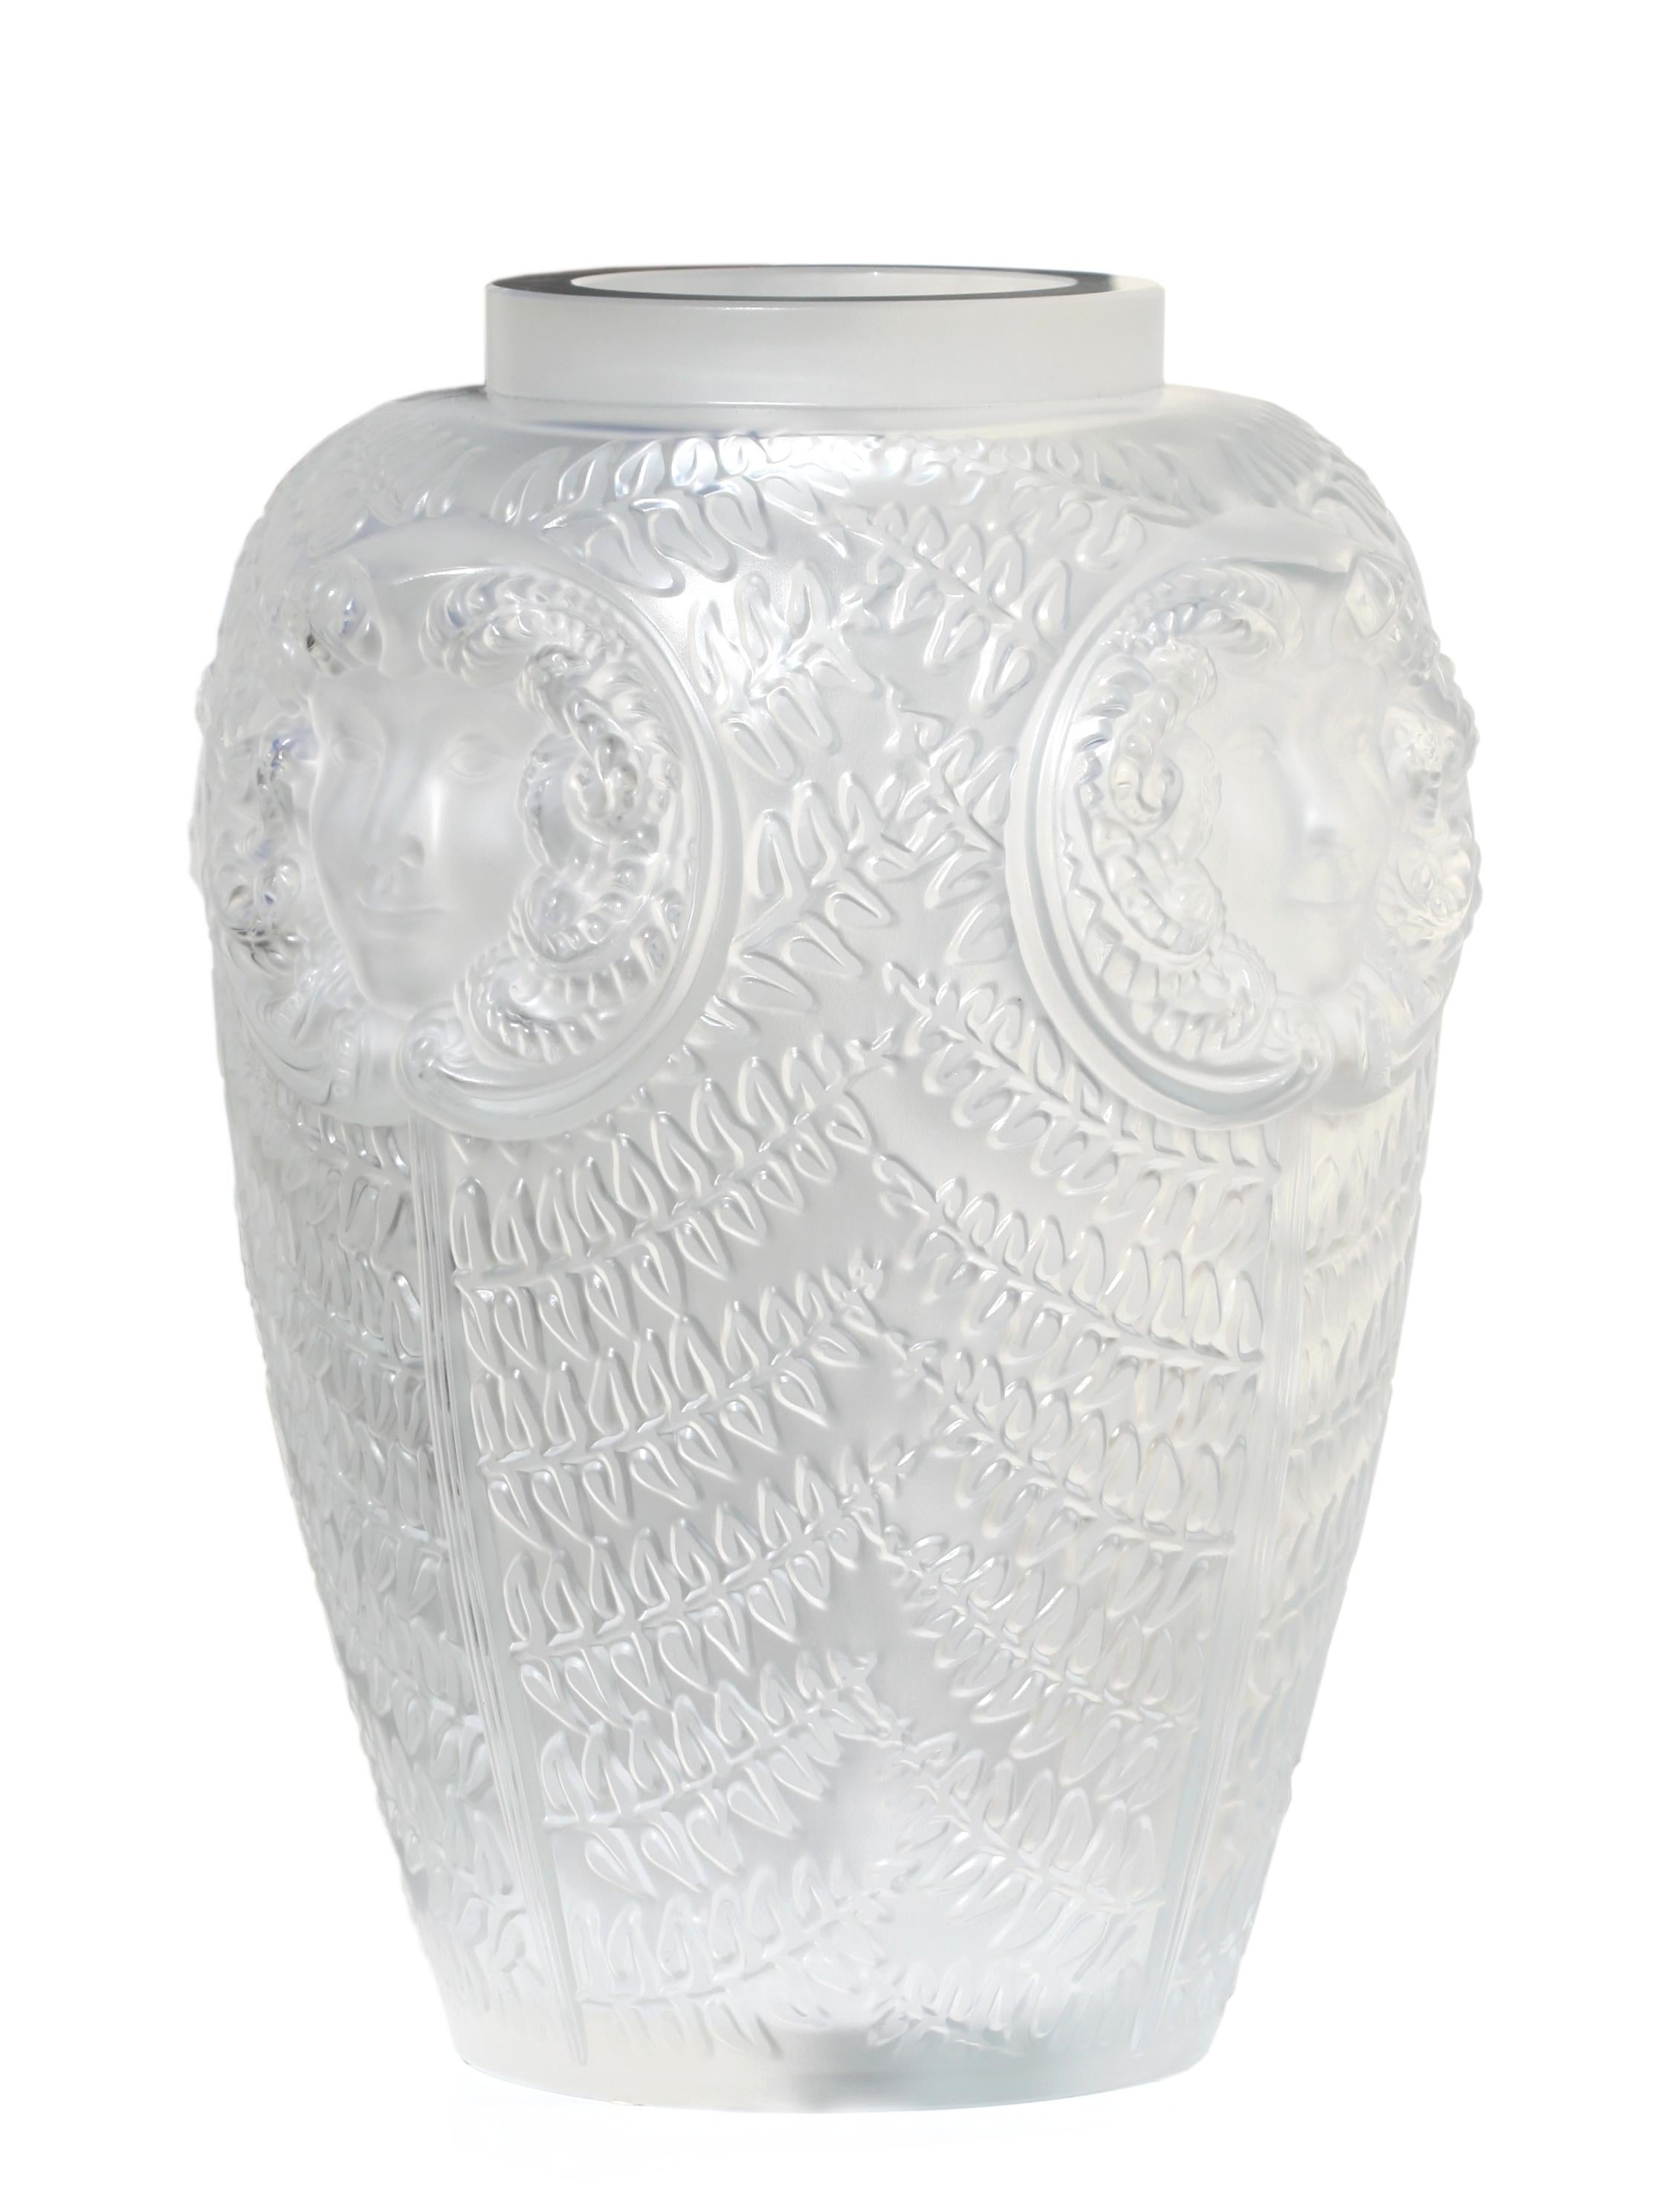 A large and impressive Lalique Masque De Femme pattern covered vase, France, 20th century, 
engraved 'Lalique France' to cover and numbered 99
Measures: approximately 88cm., 21 1/2 in. high
33cm., 13 in. width
Provenance:
Property of A Palm